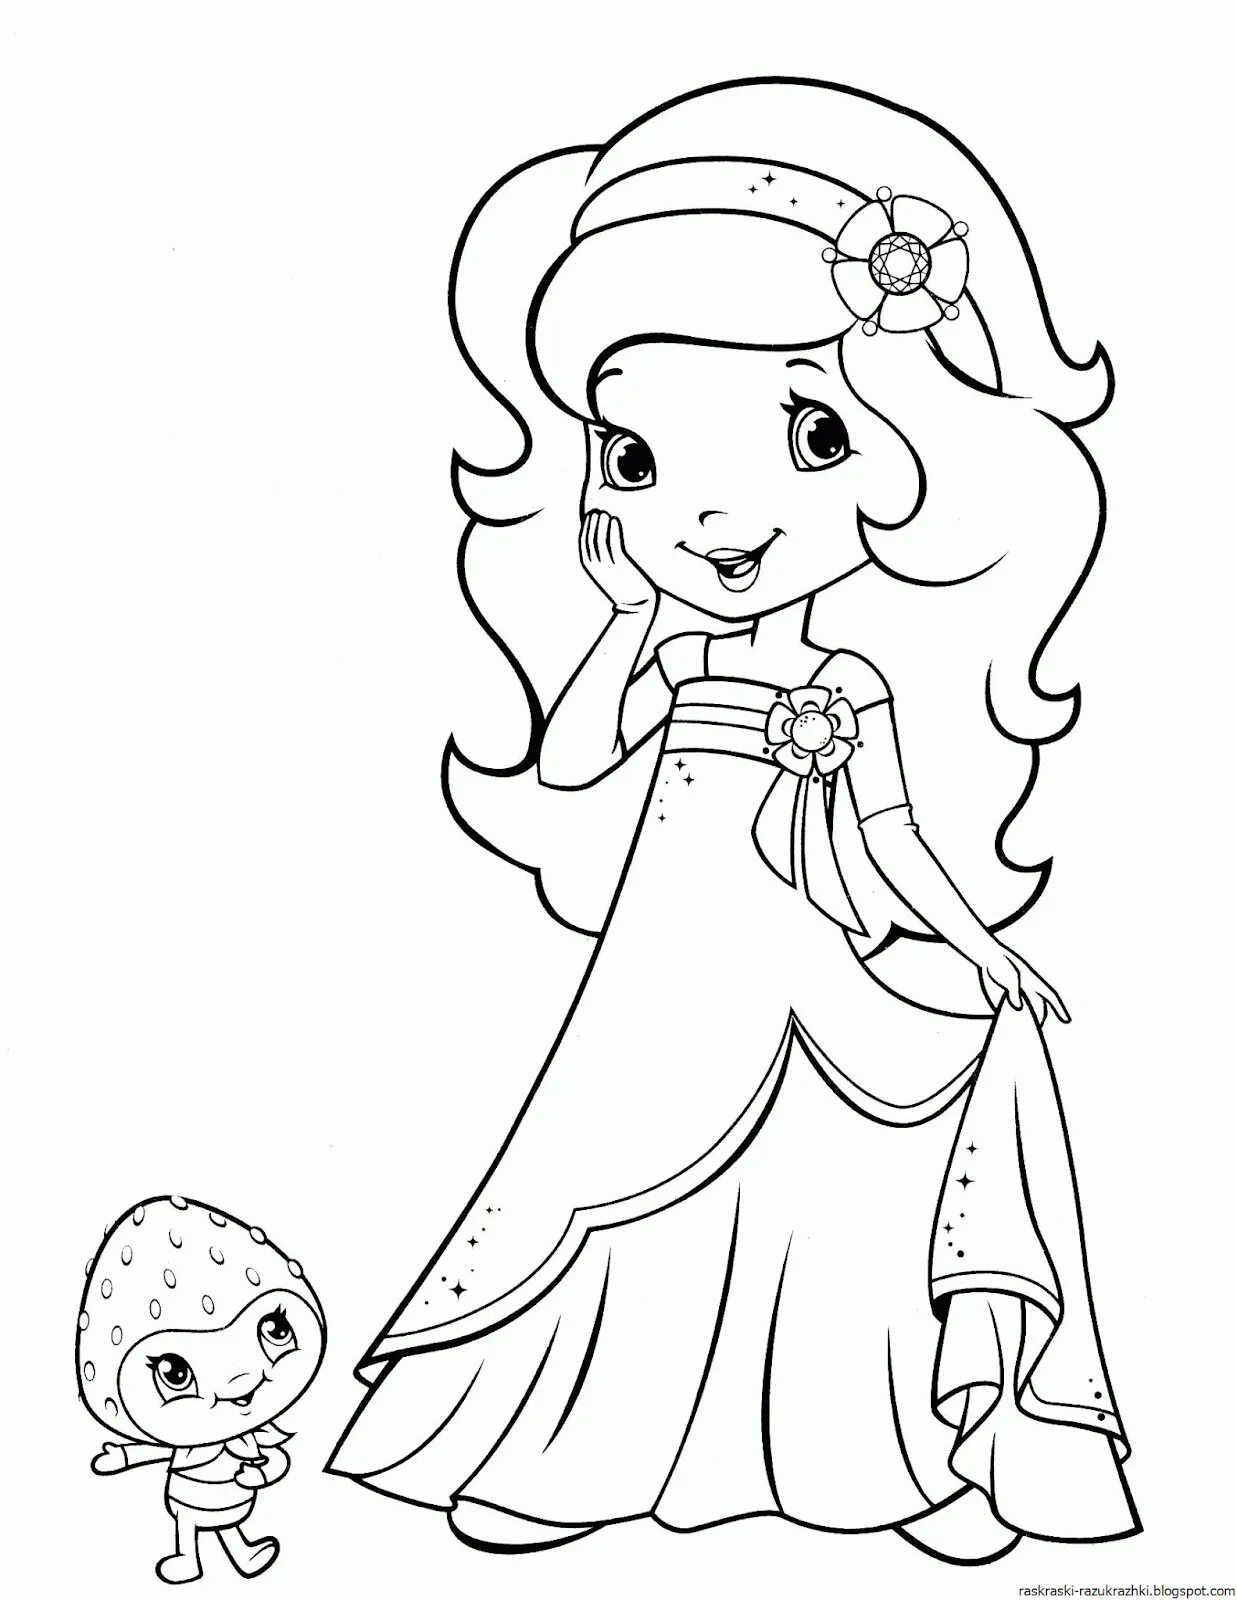 Exalted princess coloring 4-5 years old